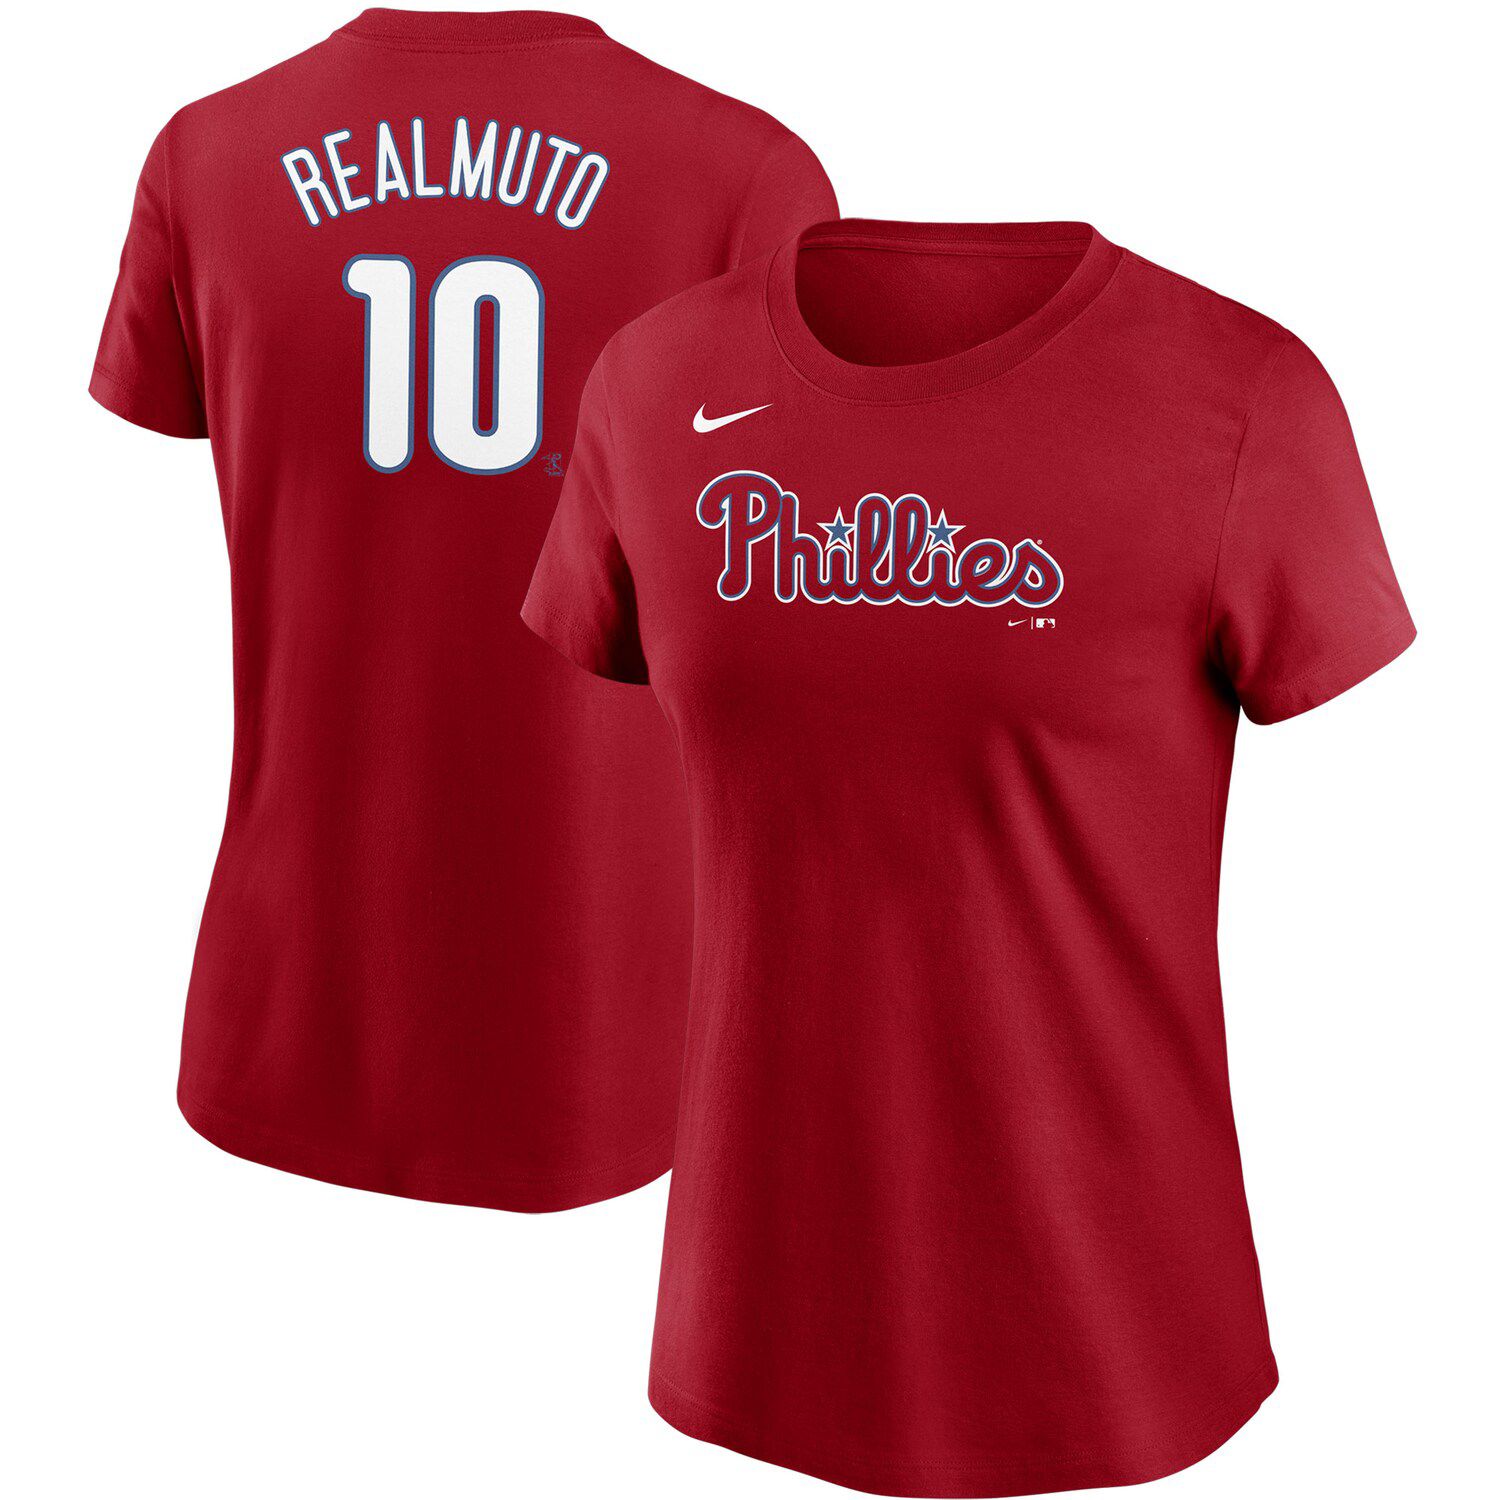 phillies realmuto jersey